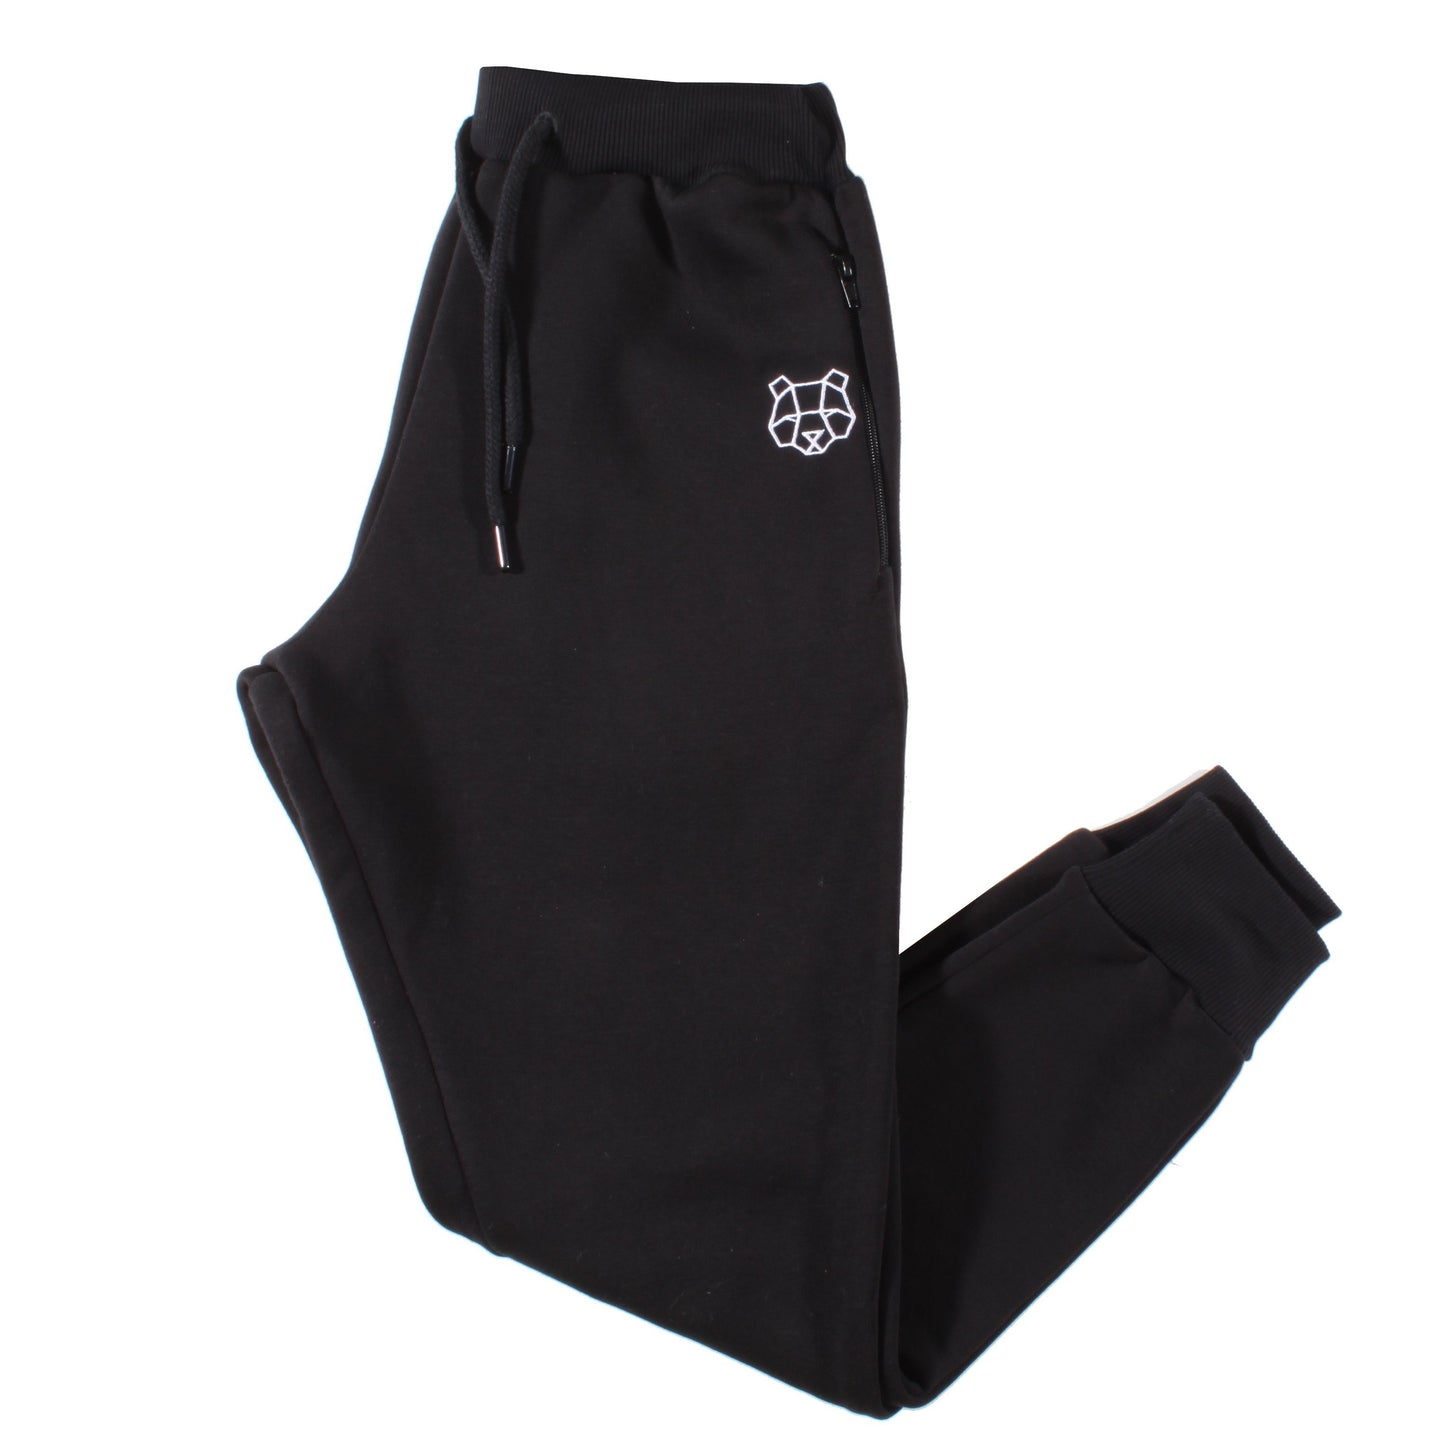 Storm Collection Fleece Lined Tracksuit Bottoms in Black